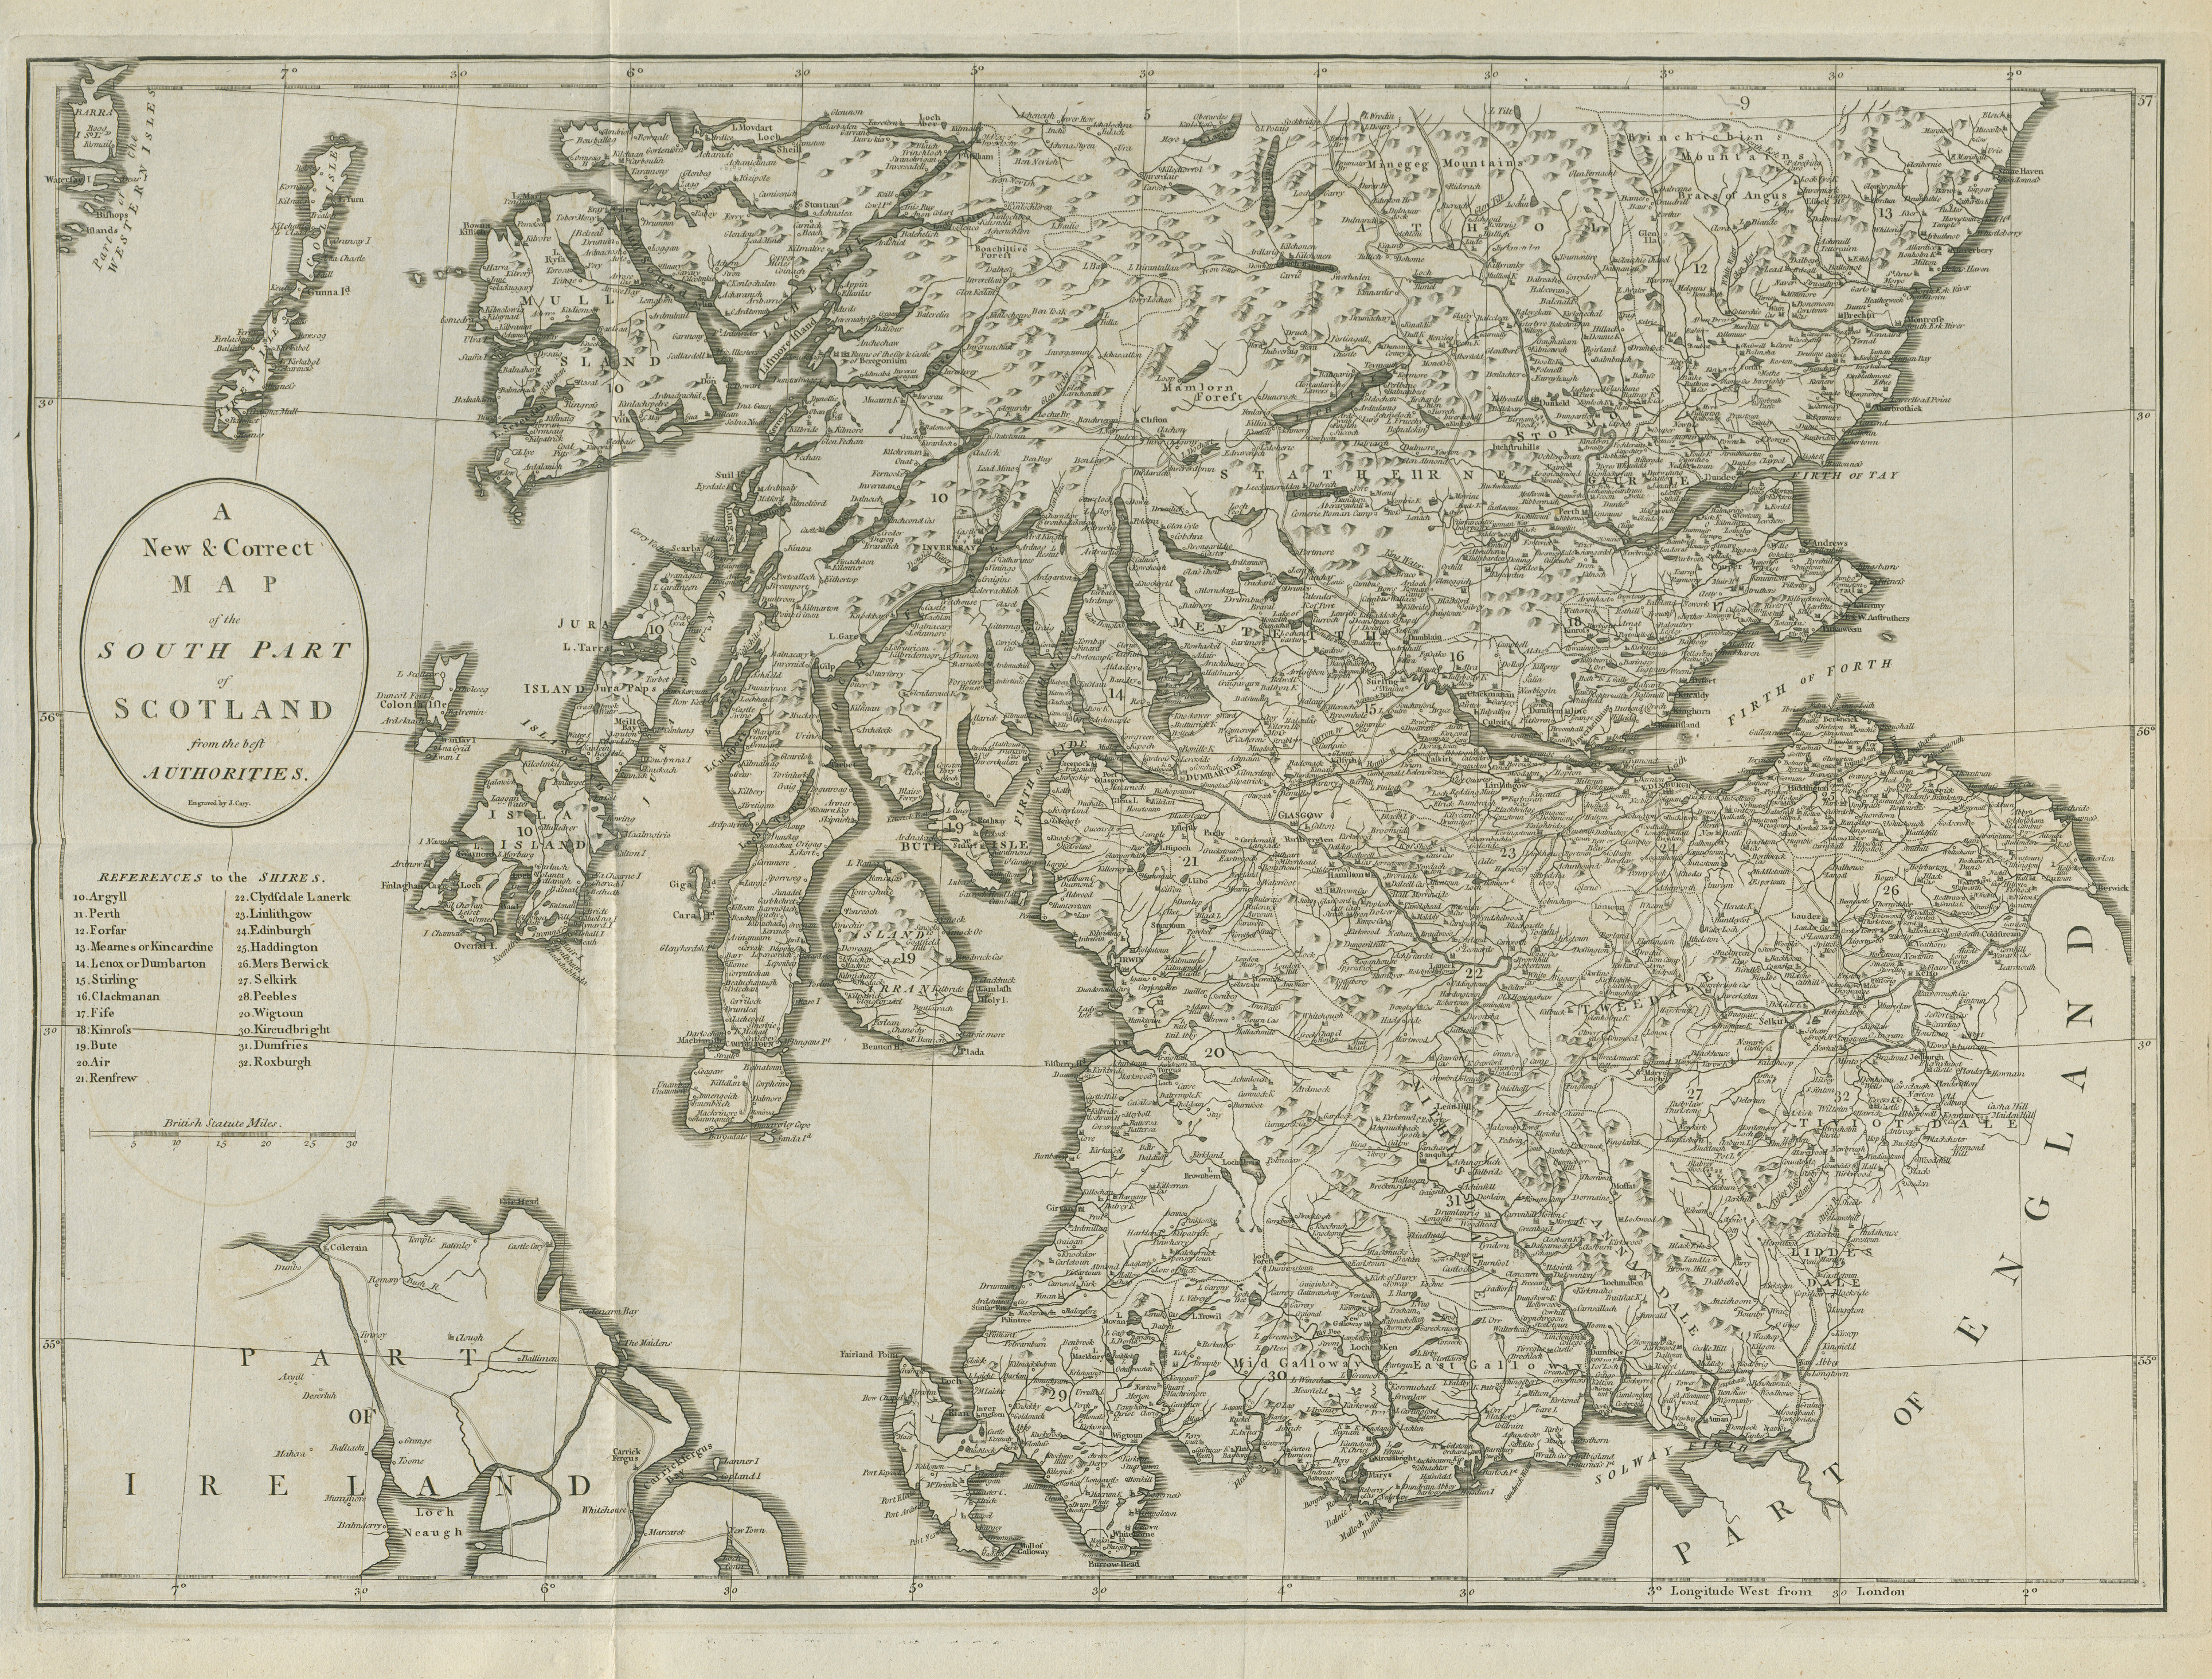 Associate Product "A new & correct map of the South part of Scotland…" by John CARY 1789 old